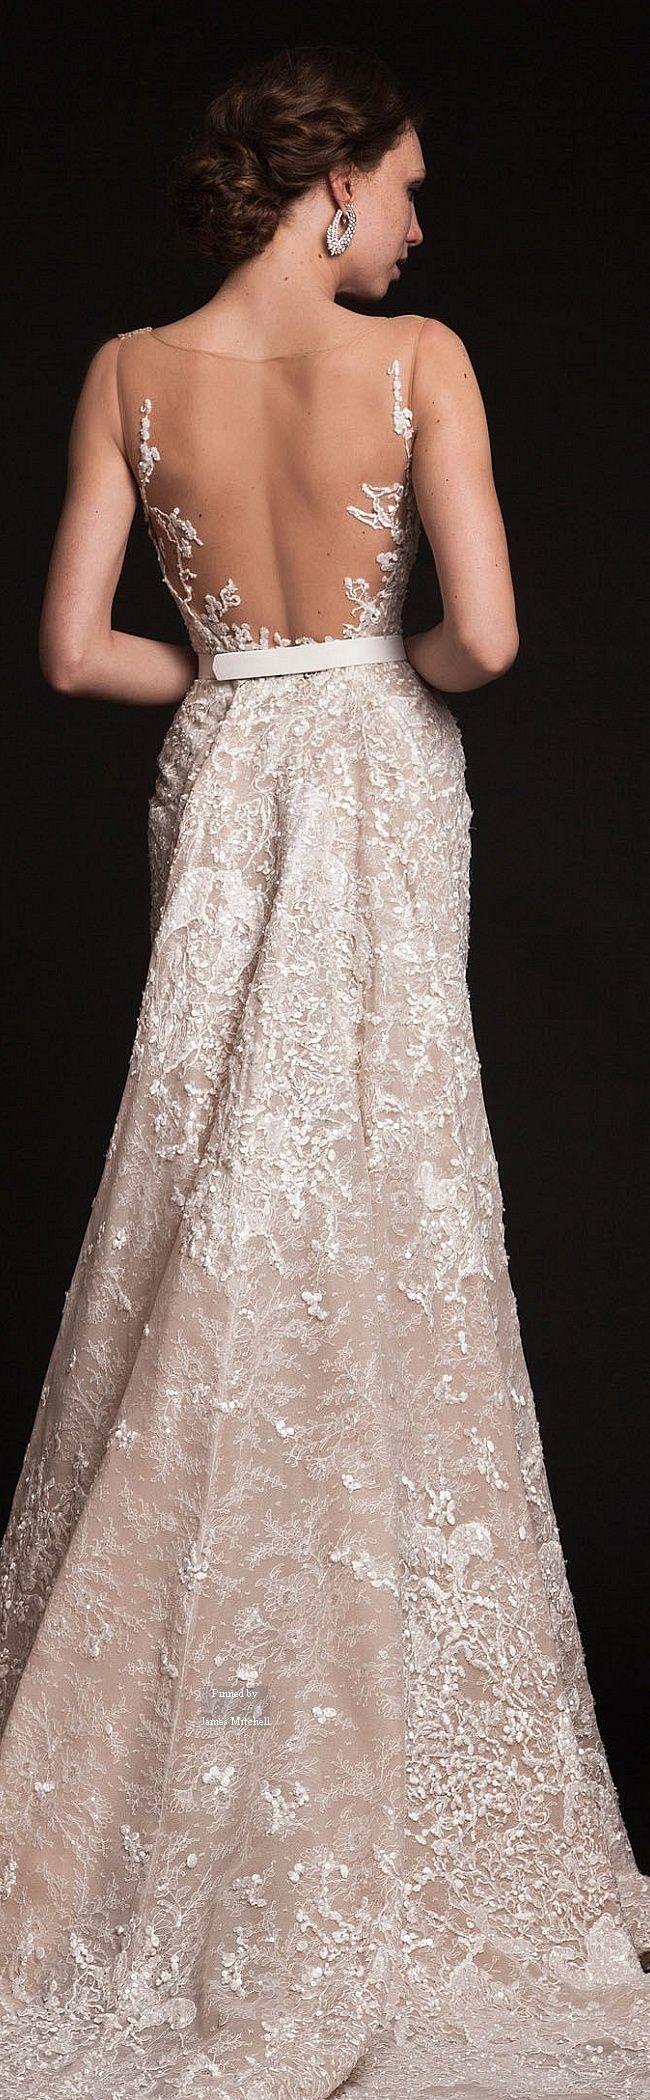 Mariage - Haute Couture... Love!